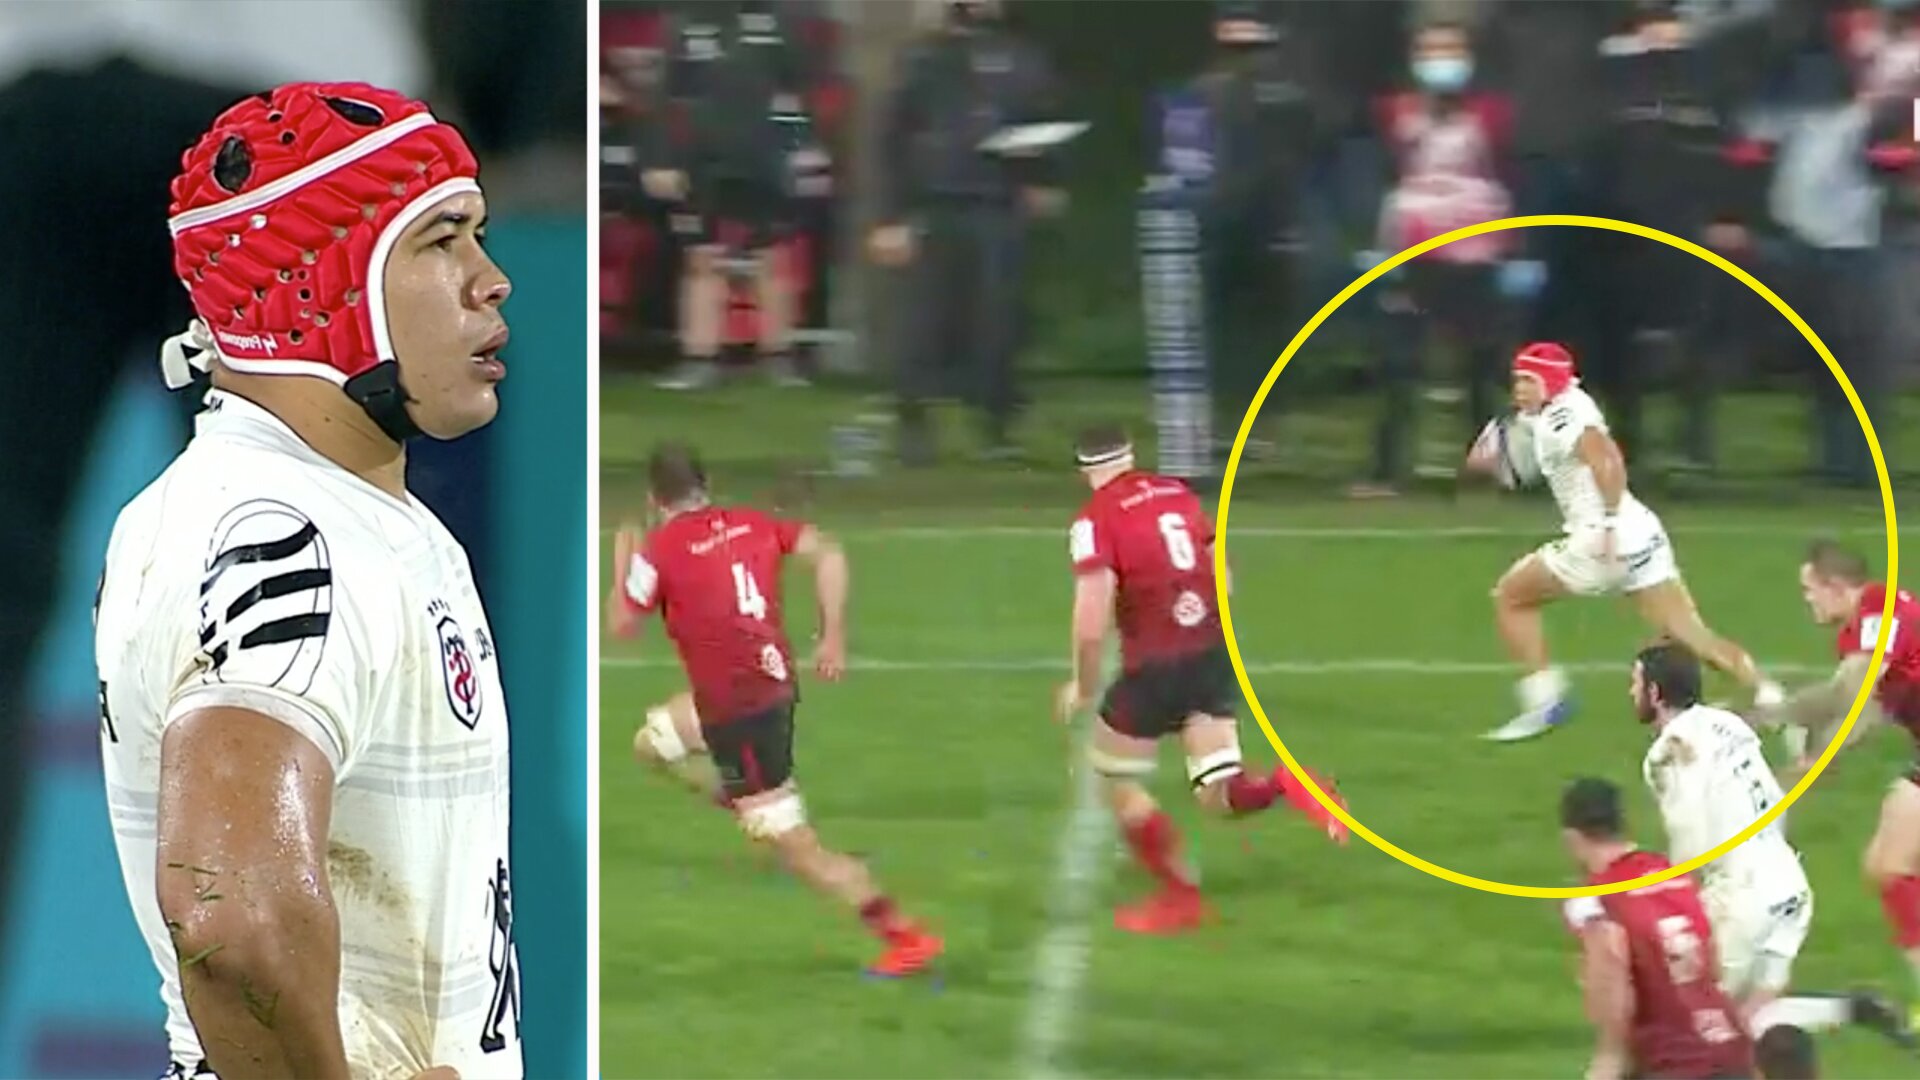 Fans left dumbfounded as Cheslin Kolbe takes on half of Ulster team to score absurd Champions Cup try